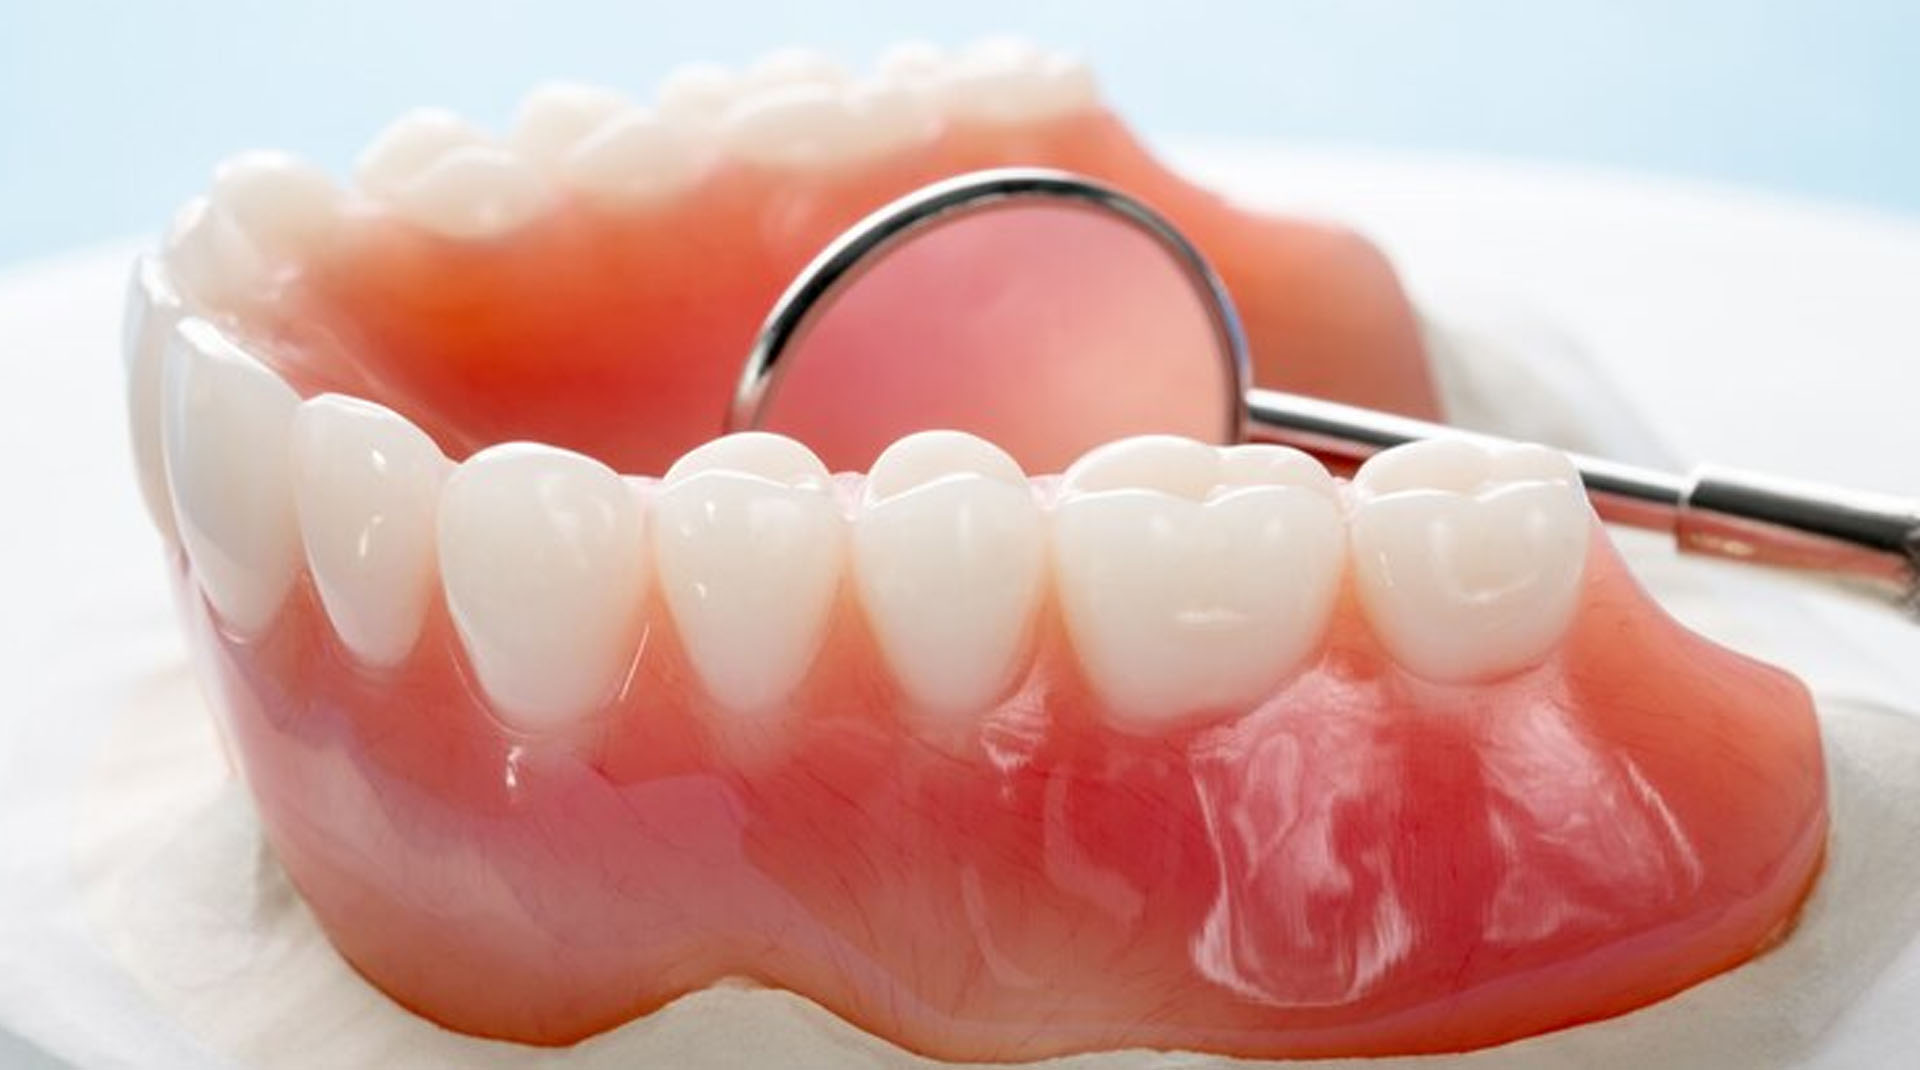 What are the Home Remedies to remove Plaque from Teeth?